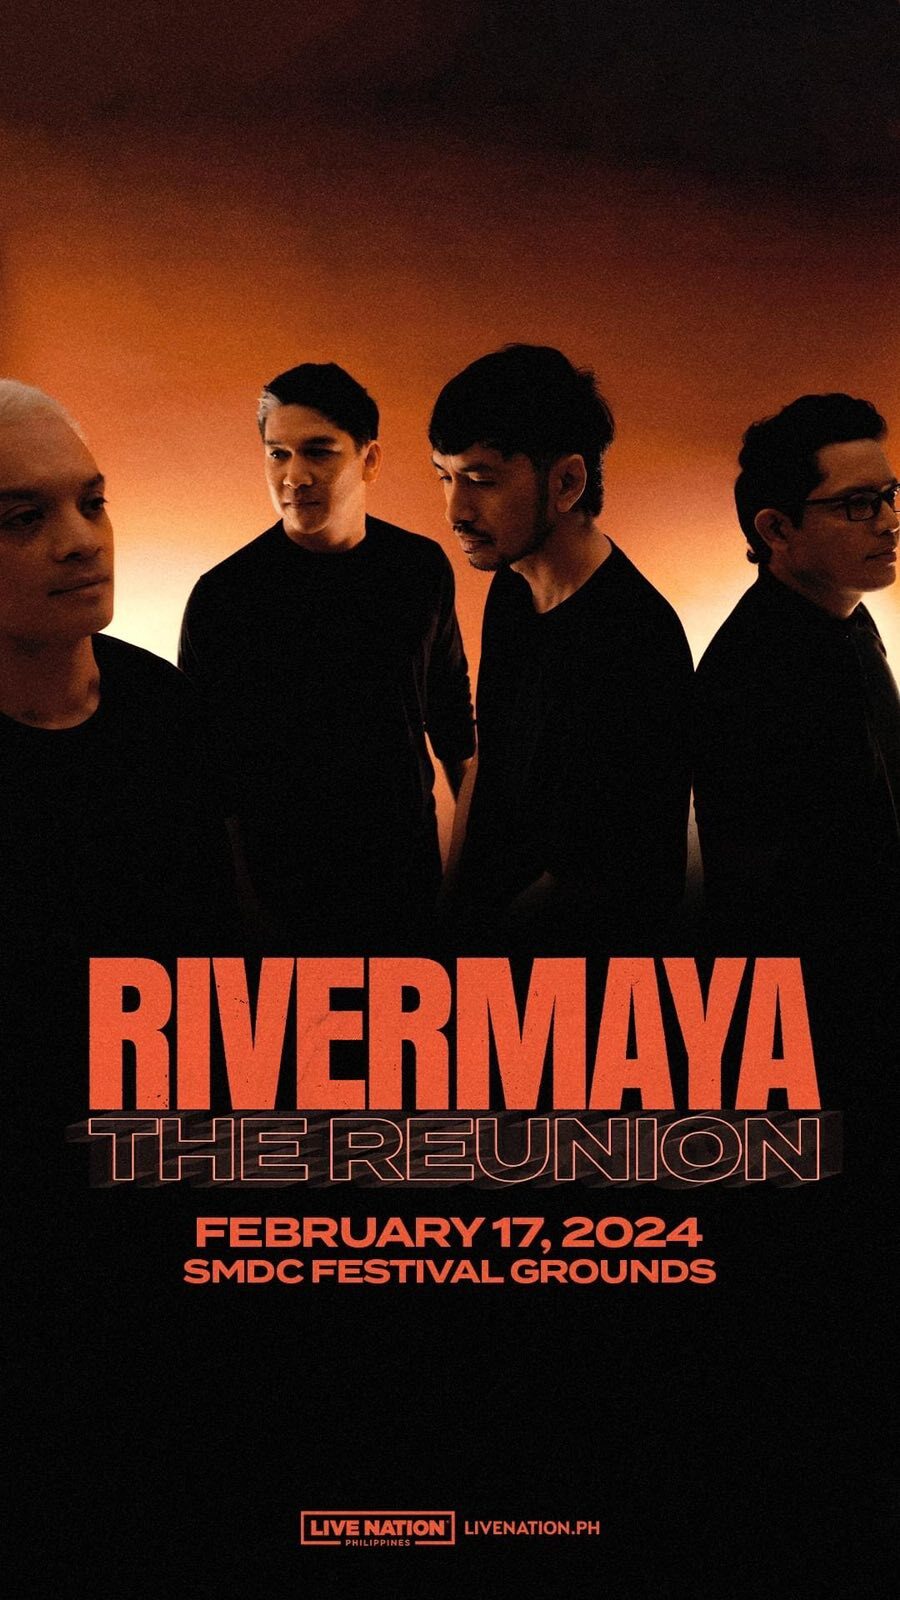 The Rivermaya reunion is confirmed.